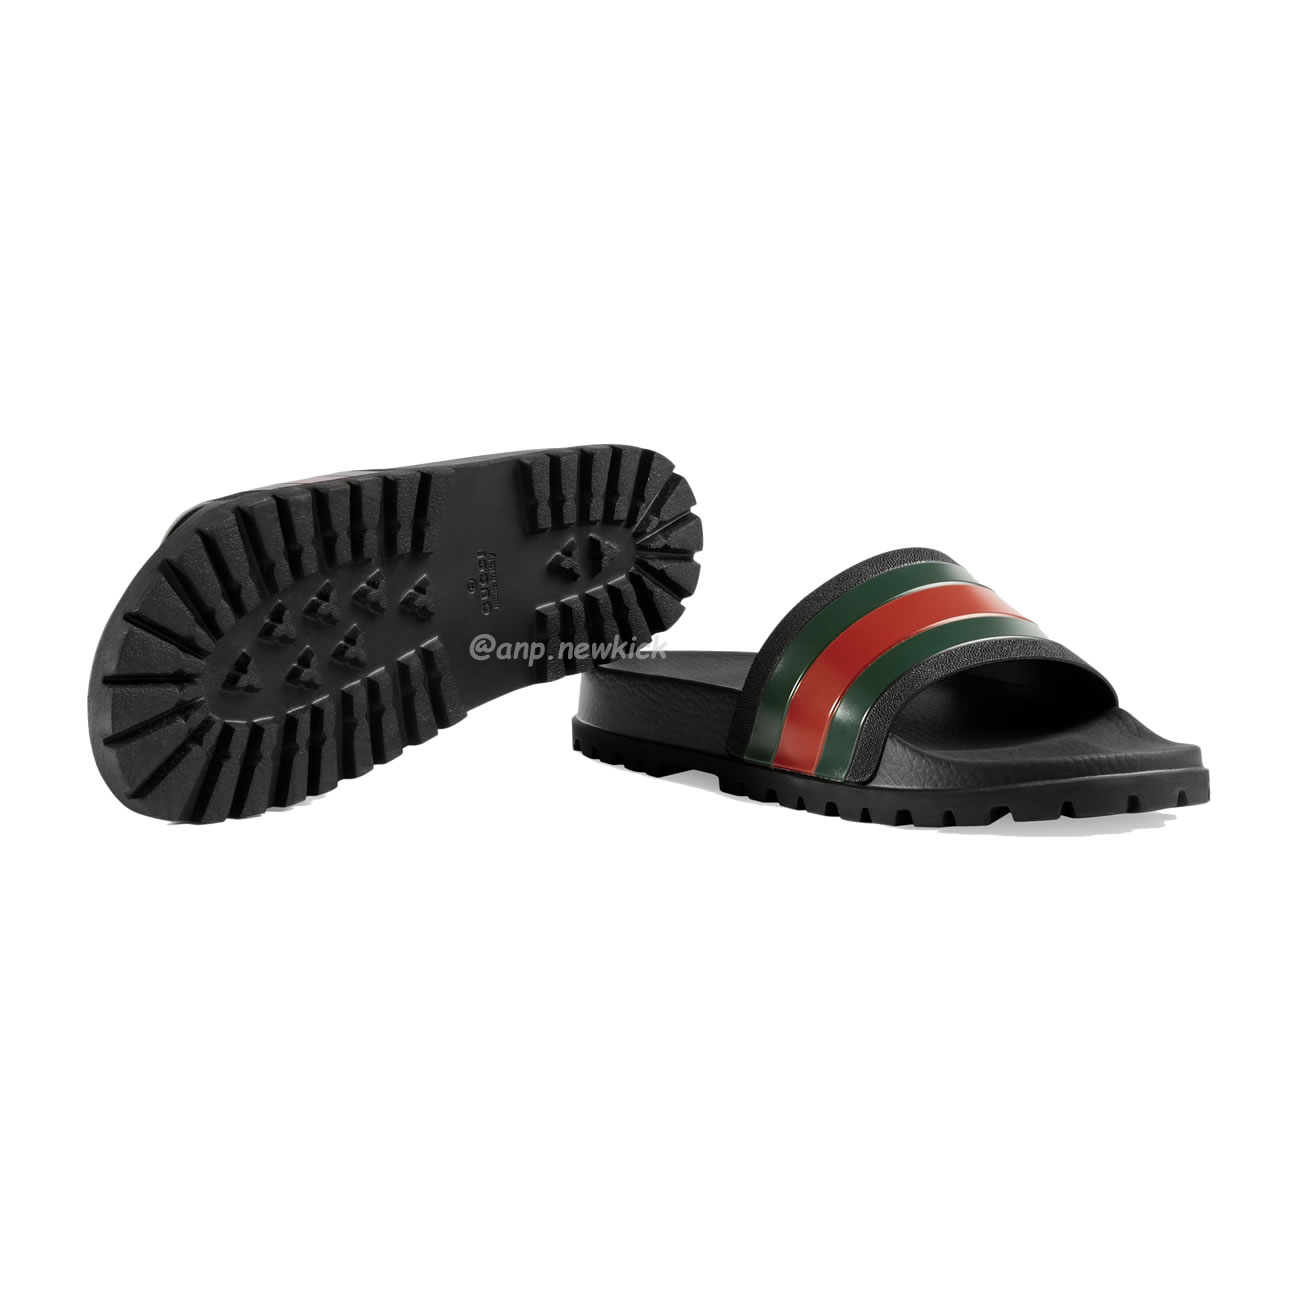 Gucci Mens Woven Leather Sandals 429469 Gib10 1098 (7) - newkick.org